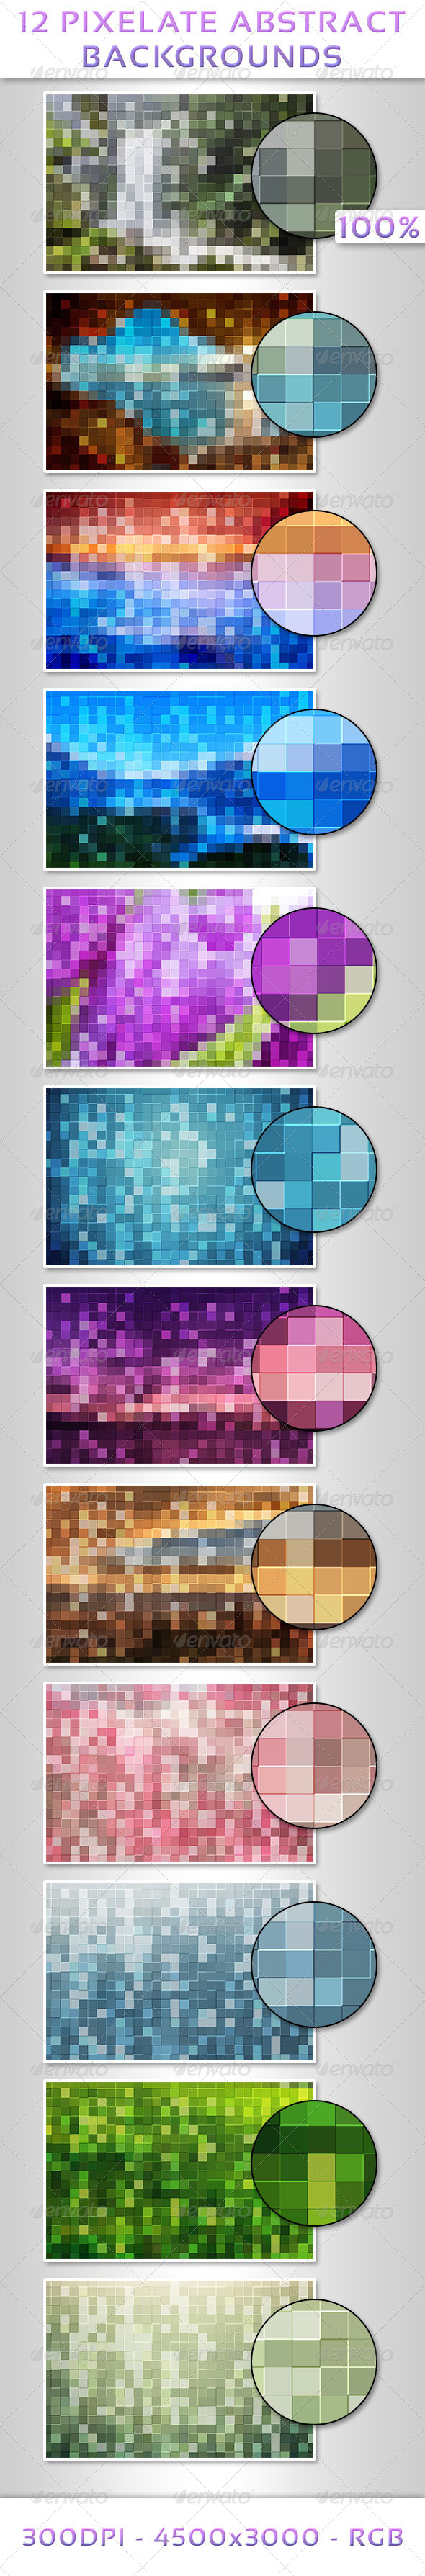 12 Pixelate Abstract Backgrounds